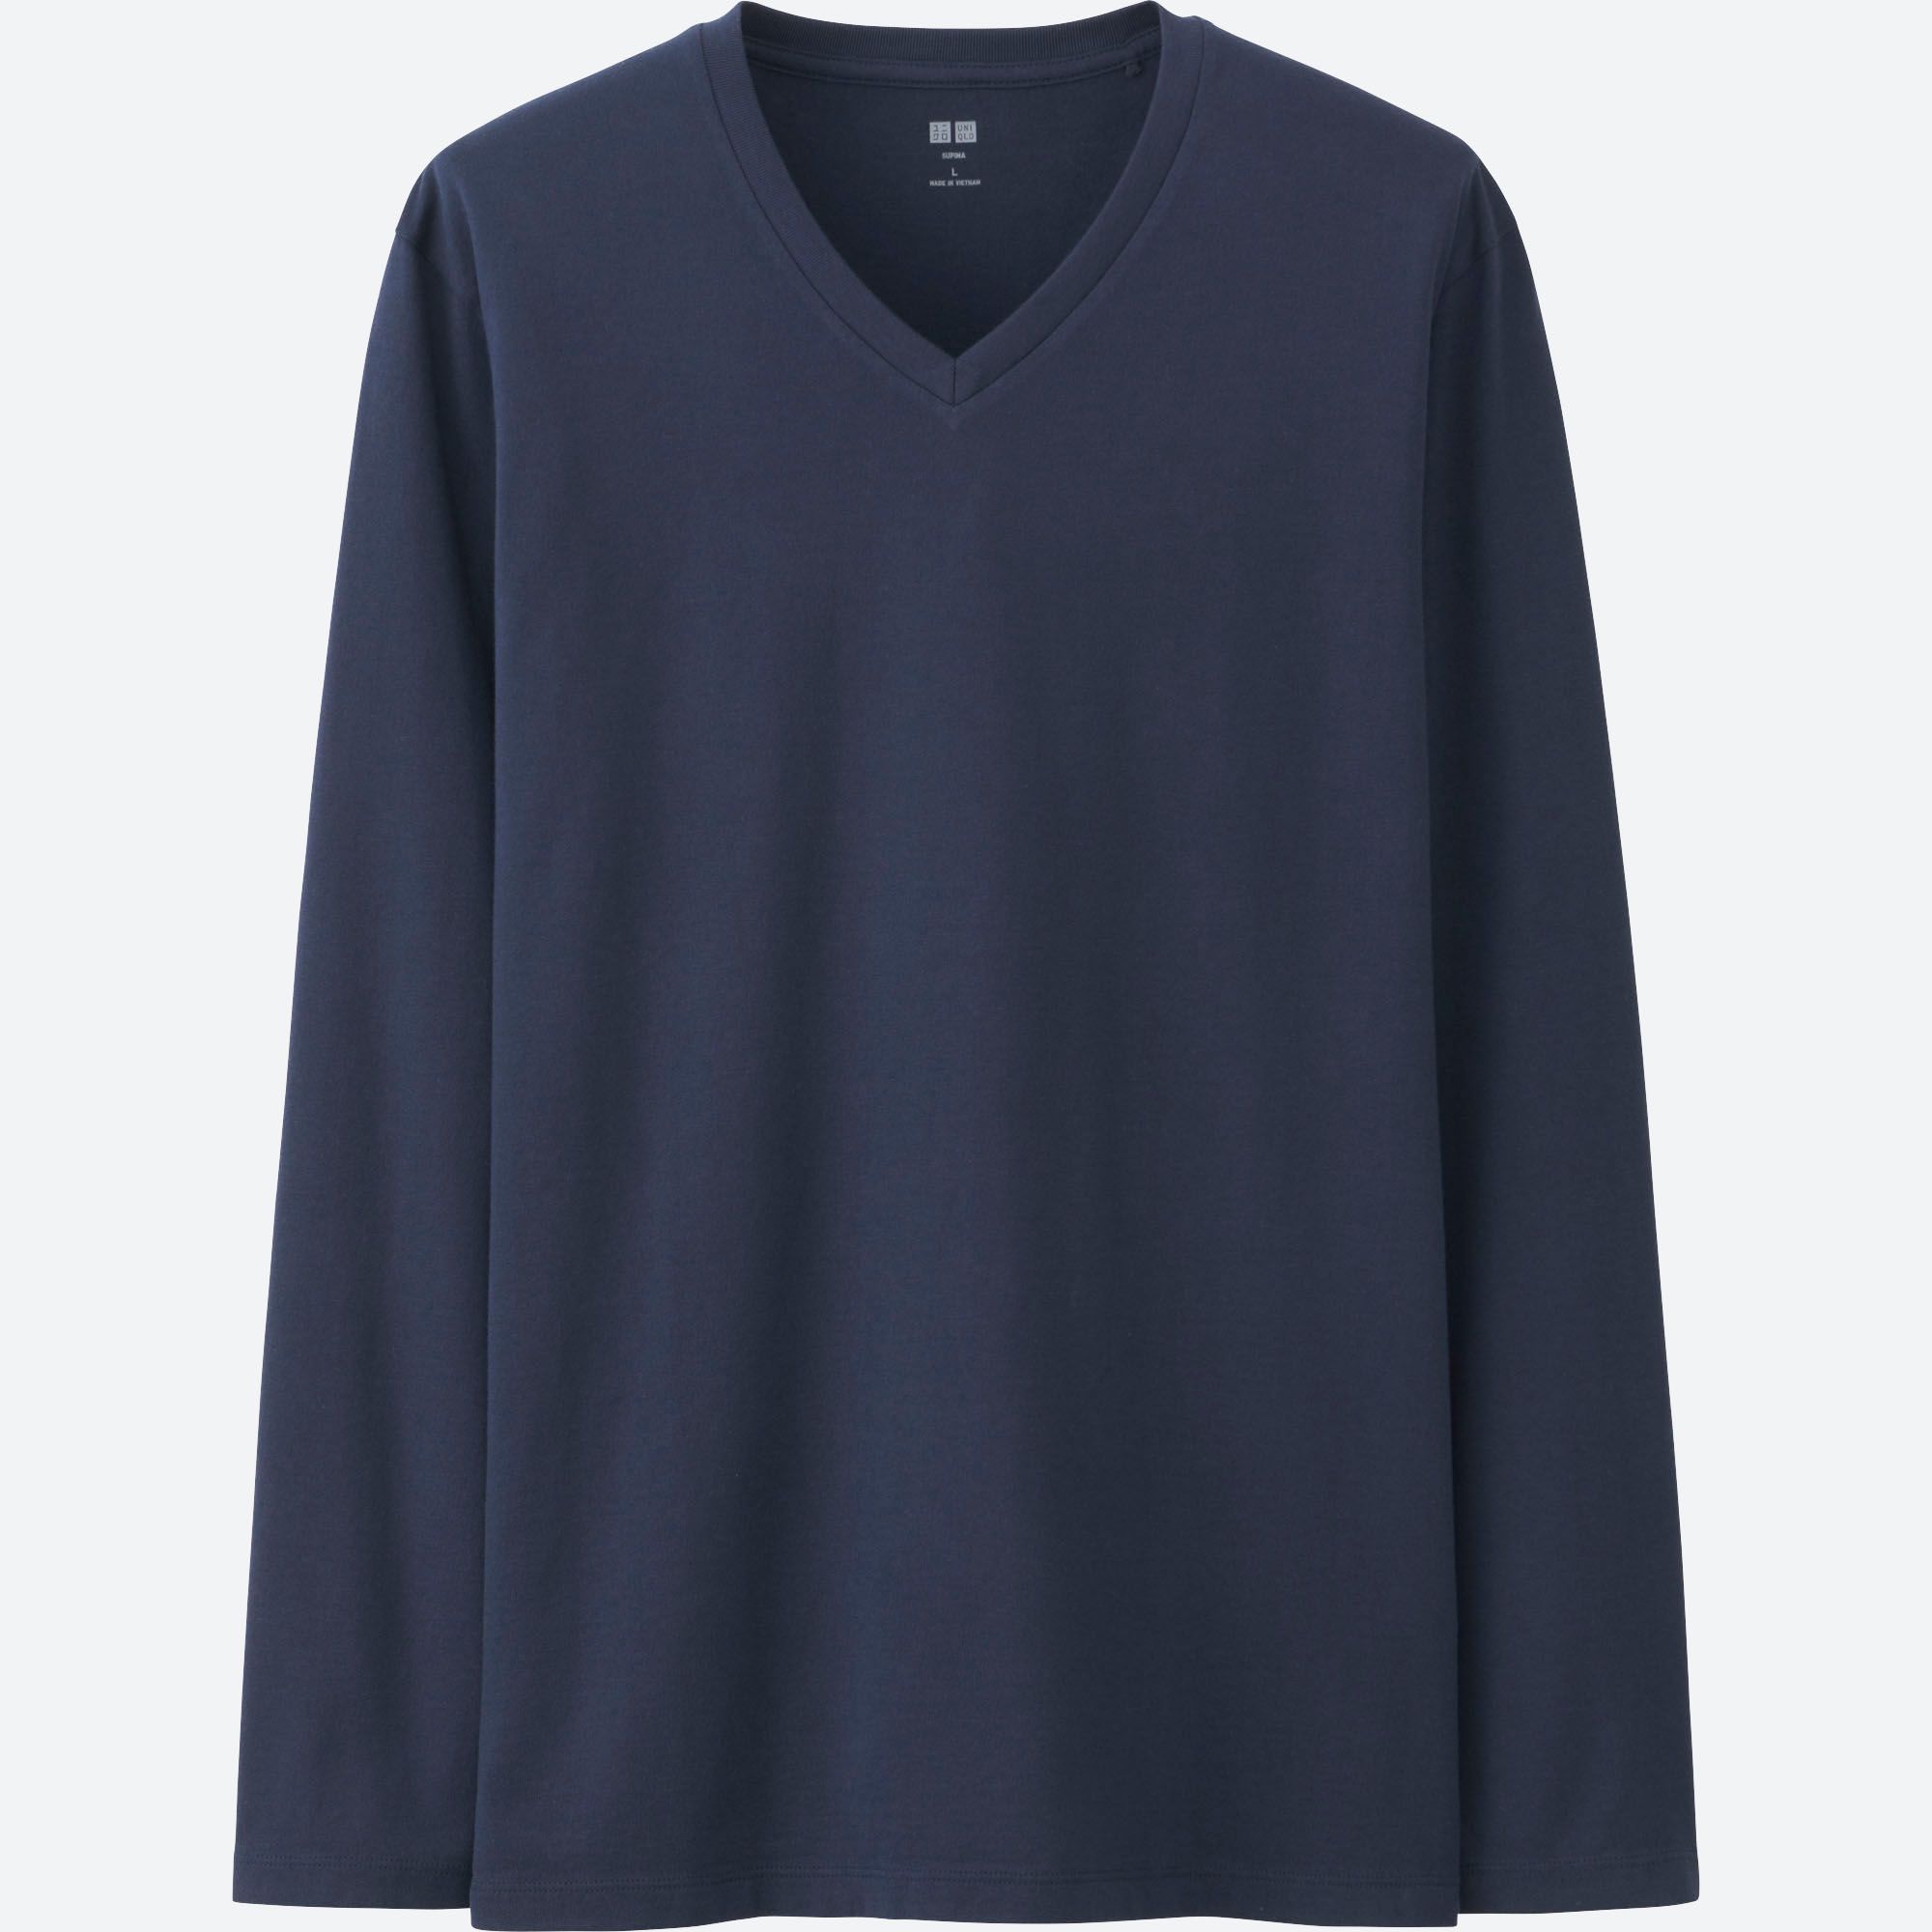 Men's Clothing Offers | Fashion Limited Offers | UNIQLO UK